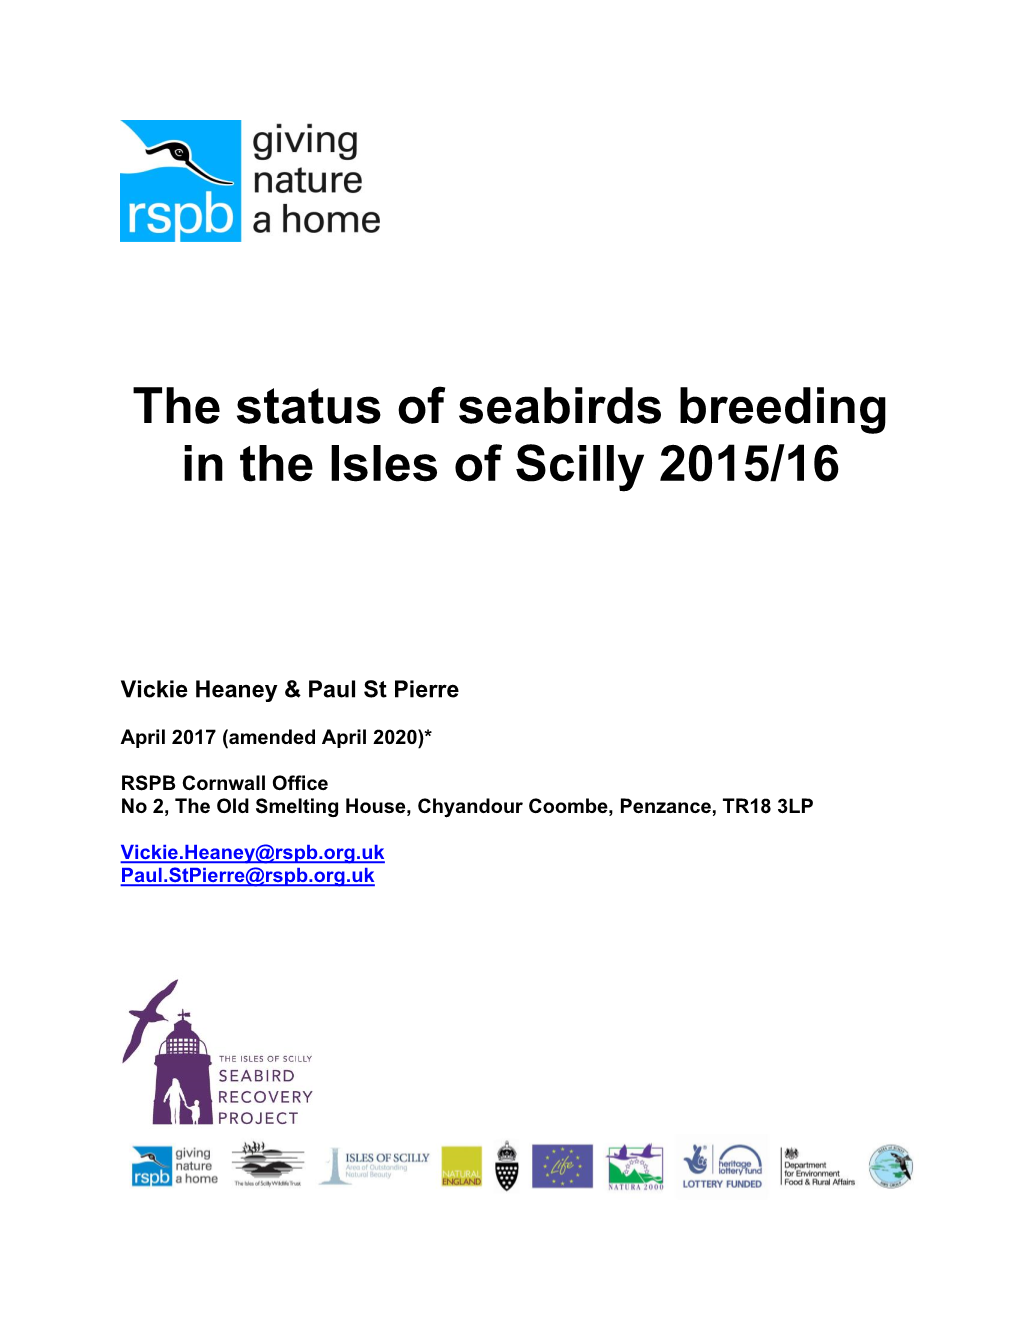 The Status of Seabirds Breeding in the Isles of Scilly 2015/16